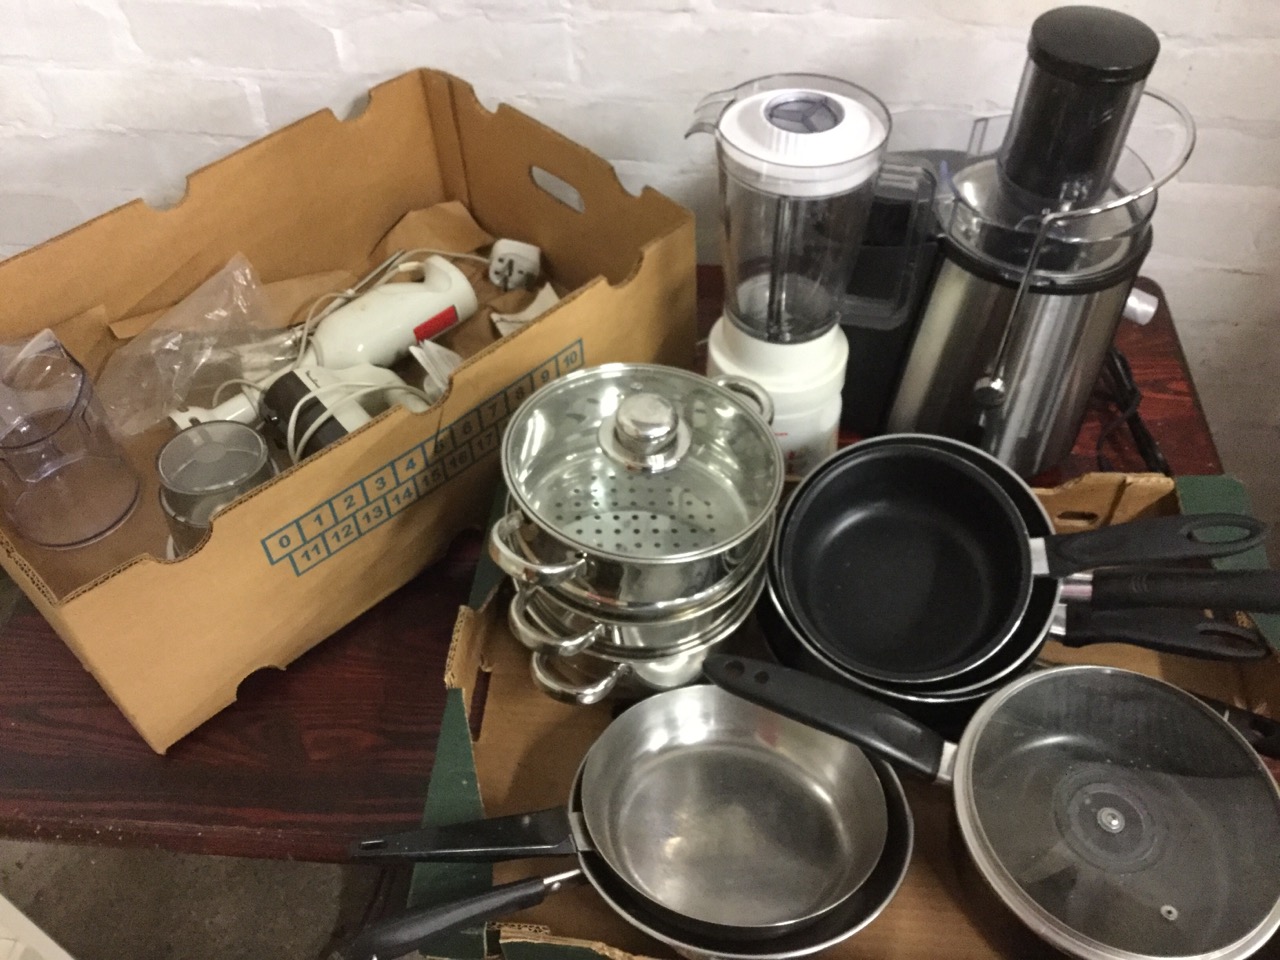 An Andrew James electric food processor; a Moulinex food mixer with various attachments, etc; and